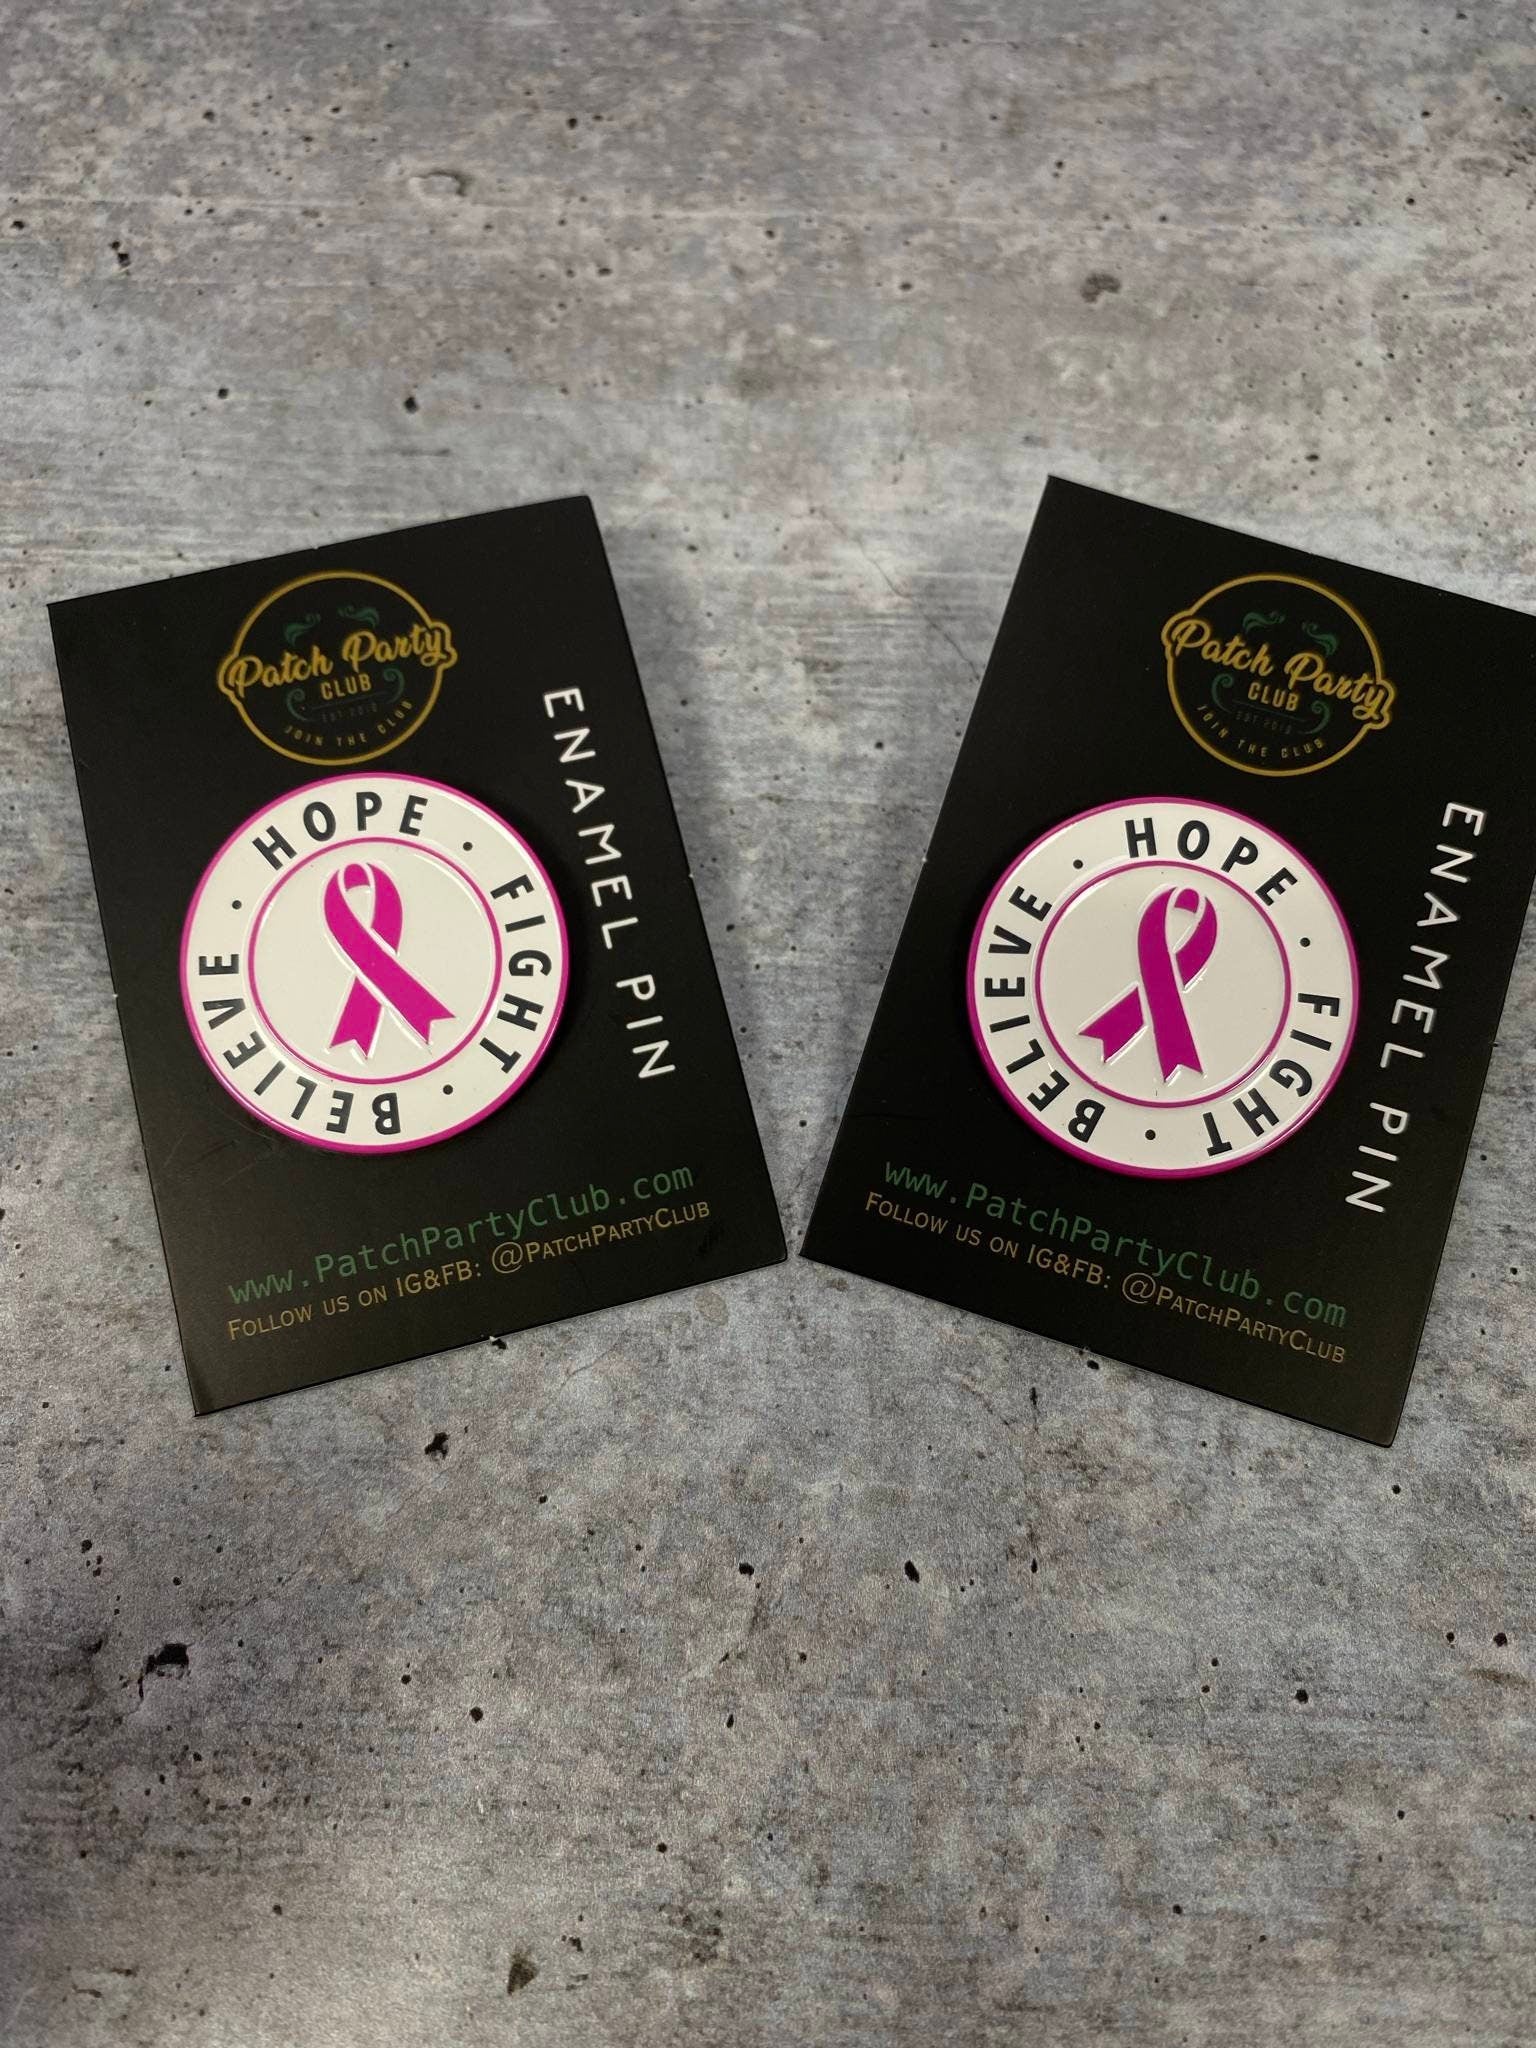 New, Breast Cancer Awareness, Enamel Pin "Hope, Fight, Believe" Pink & White, Exclusive Lapel Pin, Size 1.77 inches, w/Butterfly Clutch